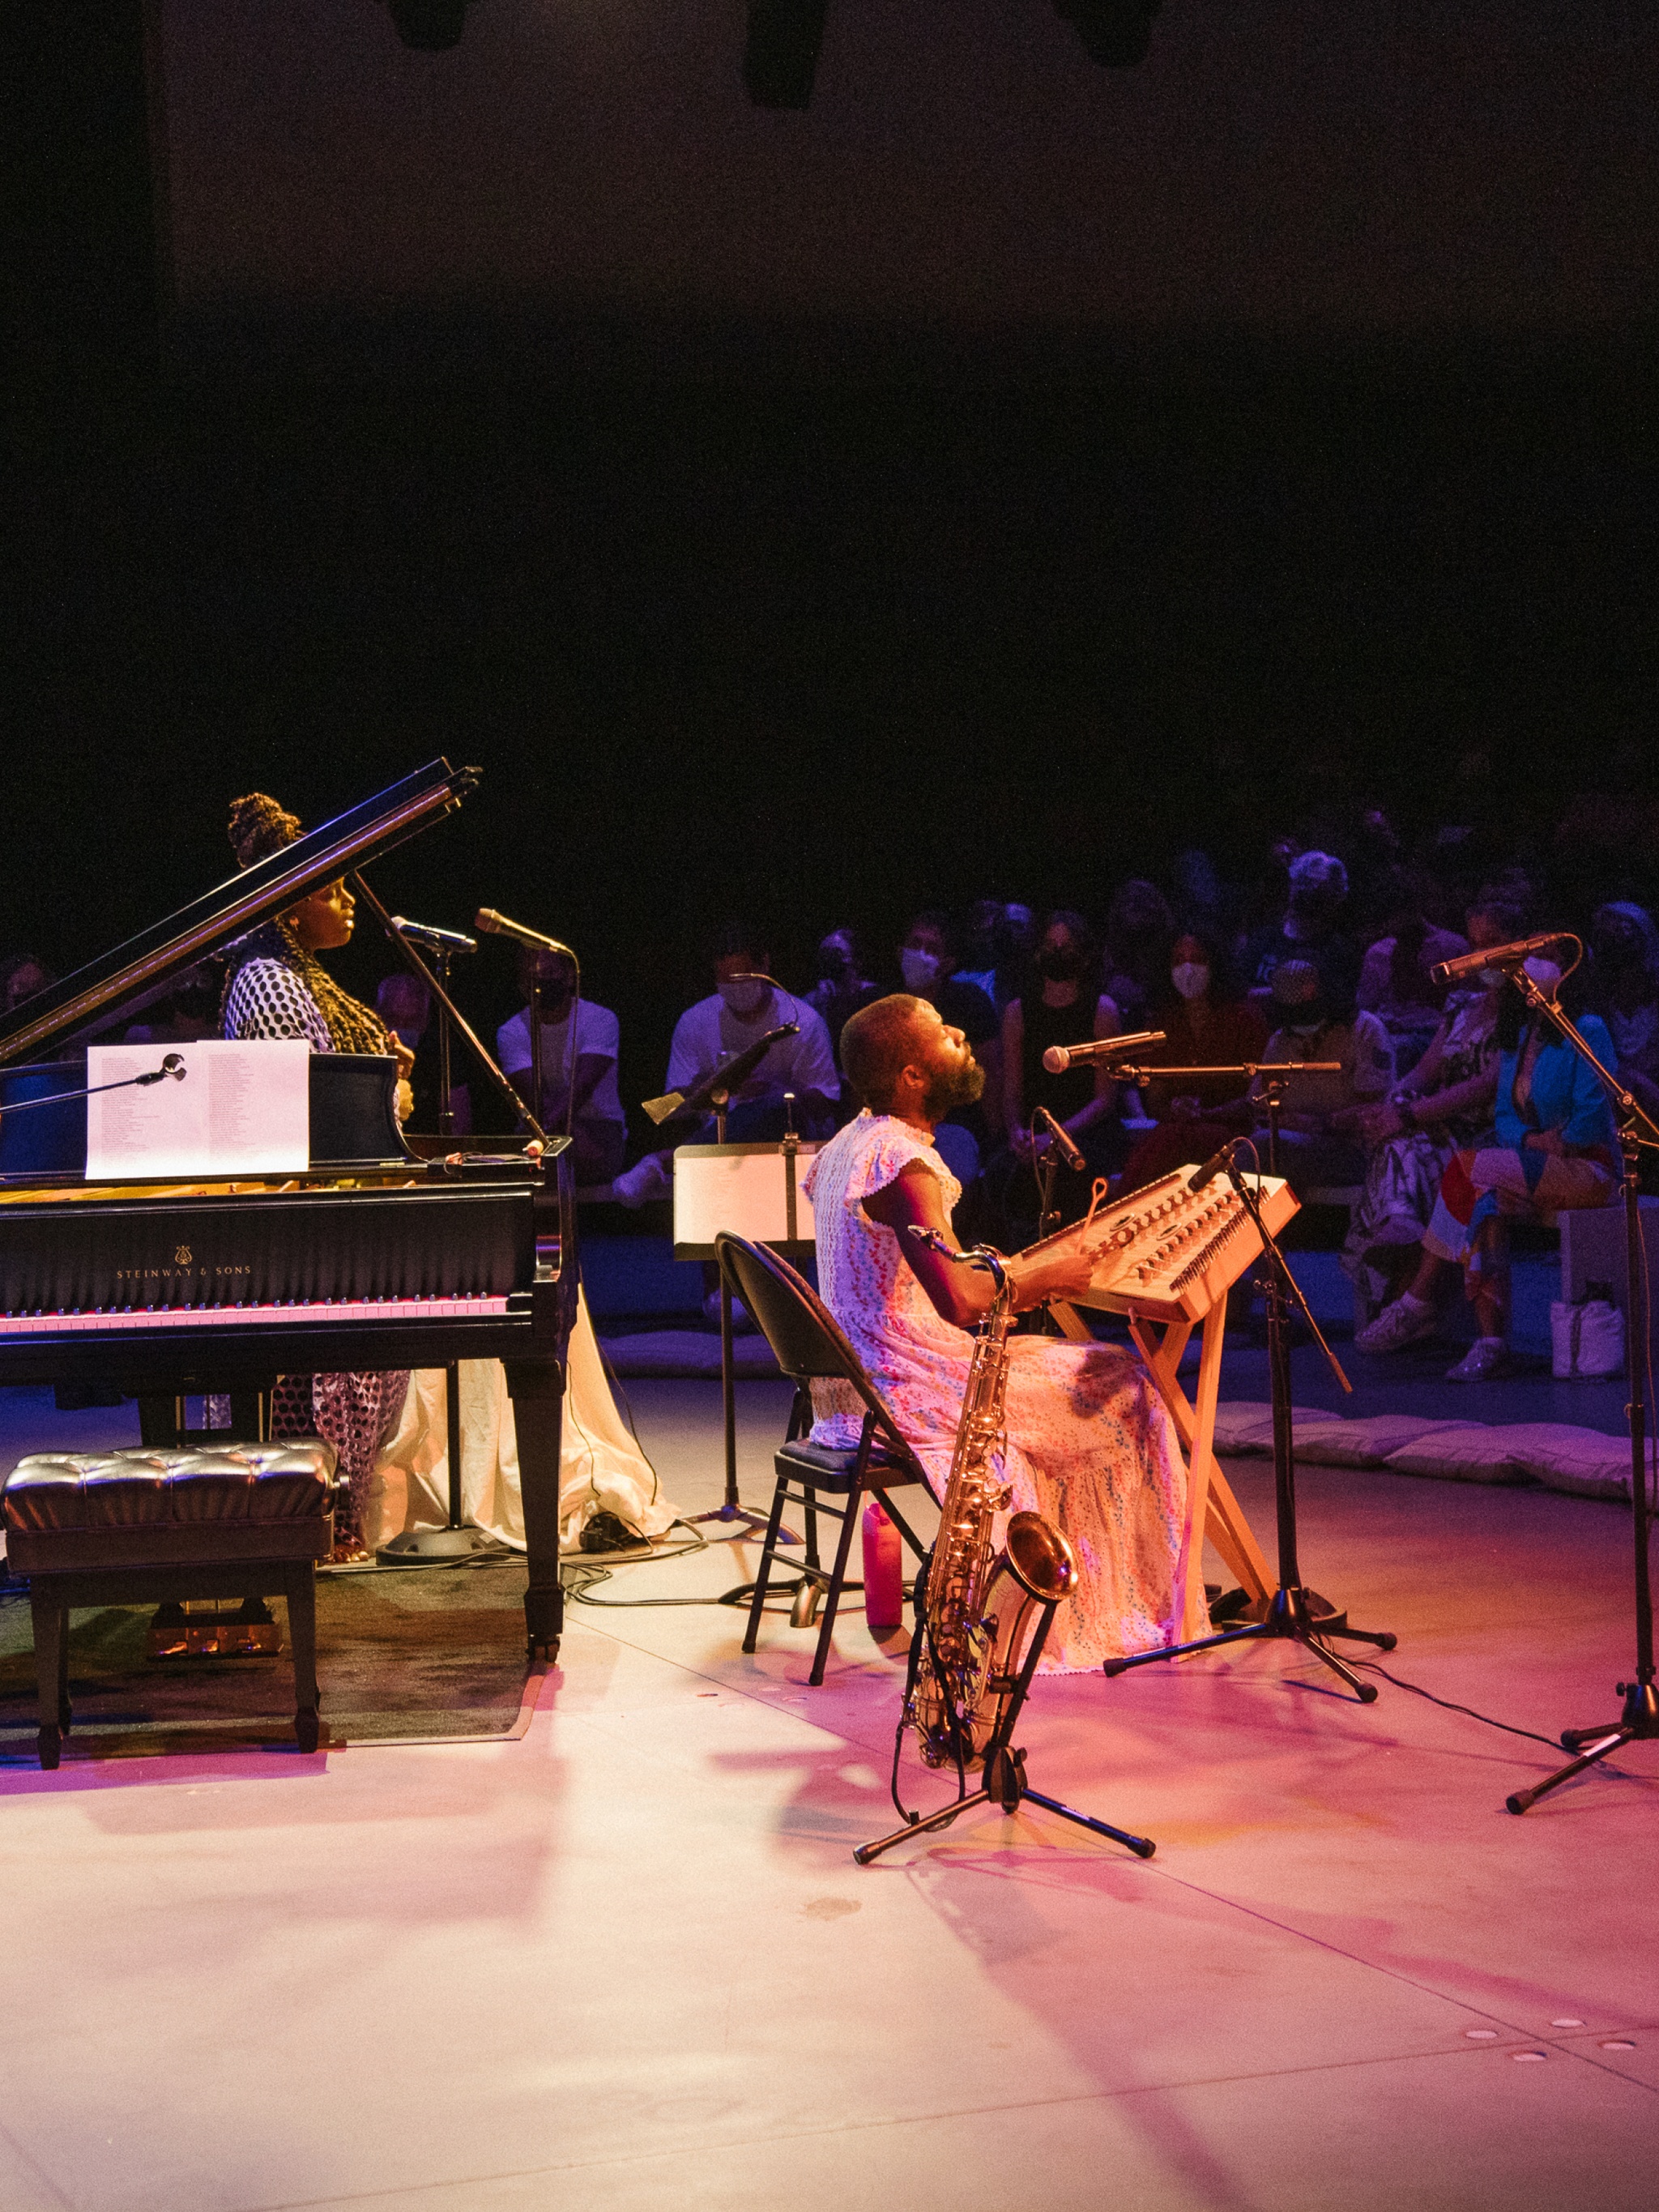 The artist Jerome Ellis sits in front of an audience arranged in a semicircle in front of him in a darkened theater space. Jerome is a Black man who wears a long dress and has a beard. Beside him is a baby grand piano and a Black woman who is a singer.